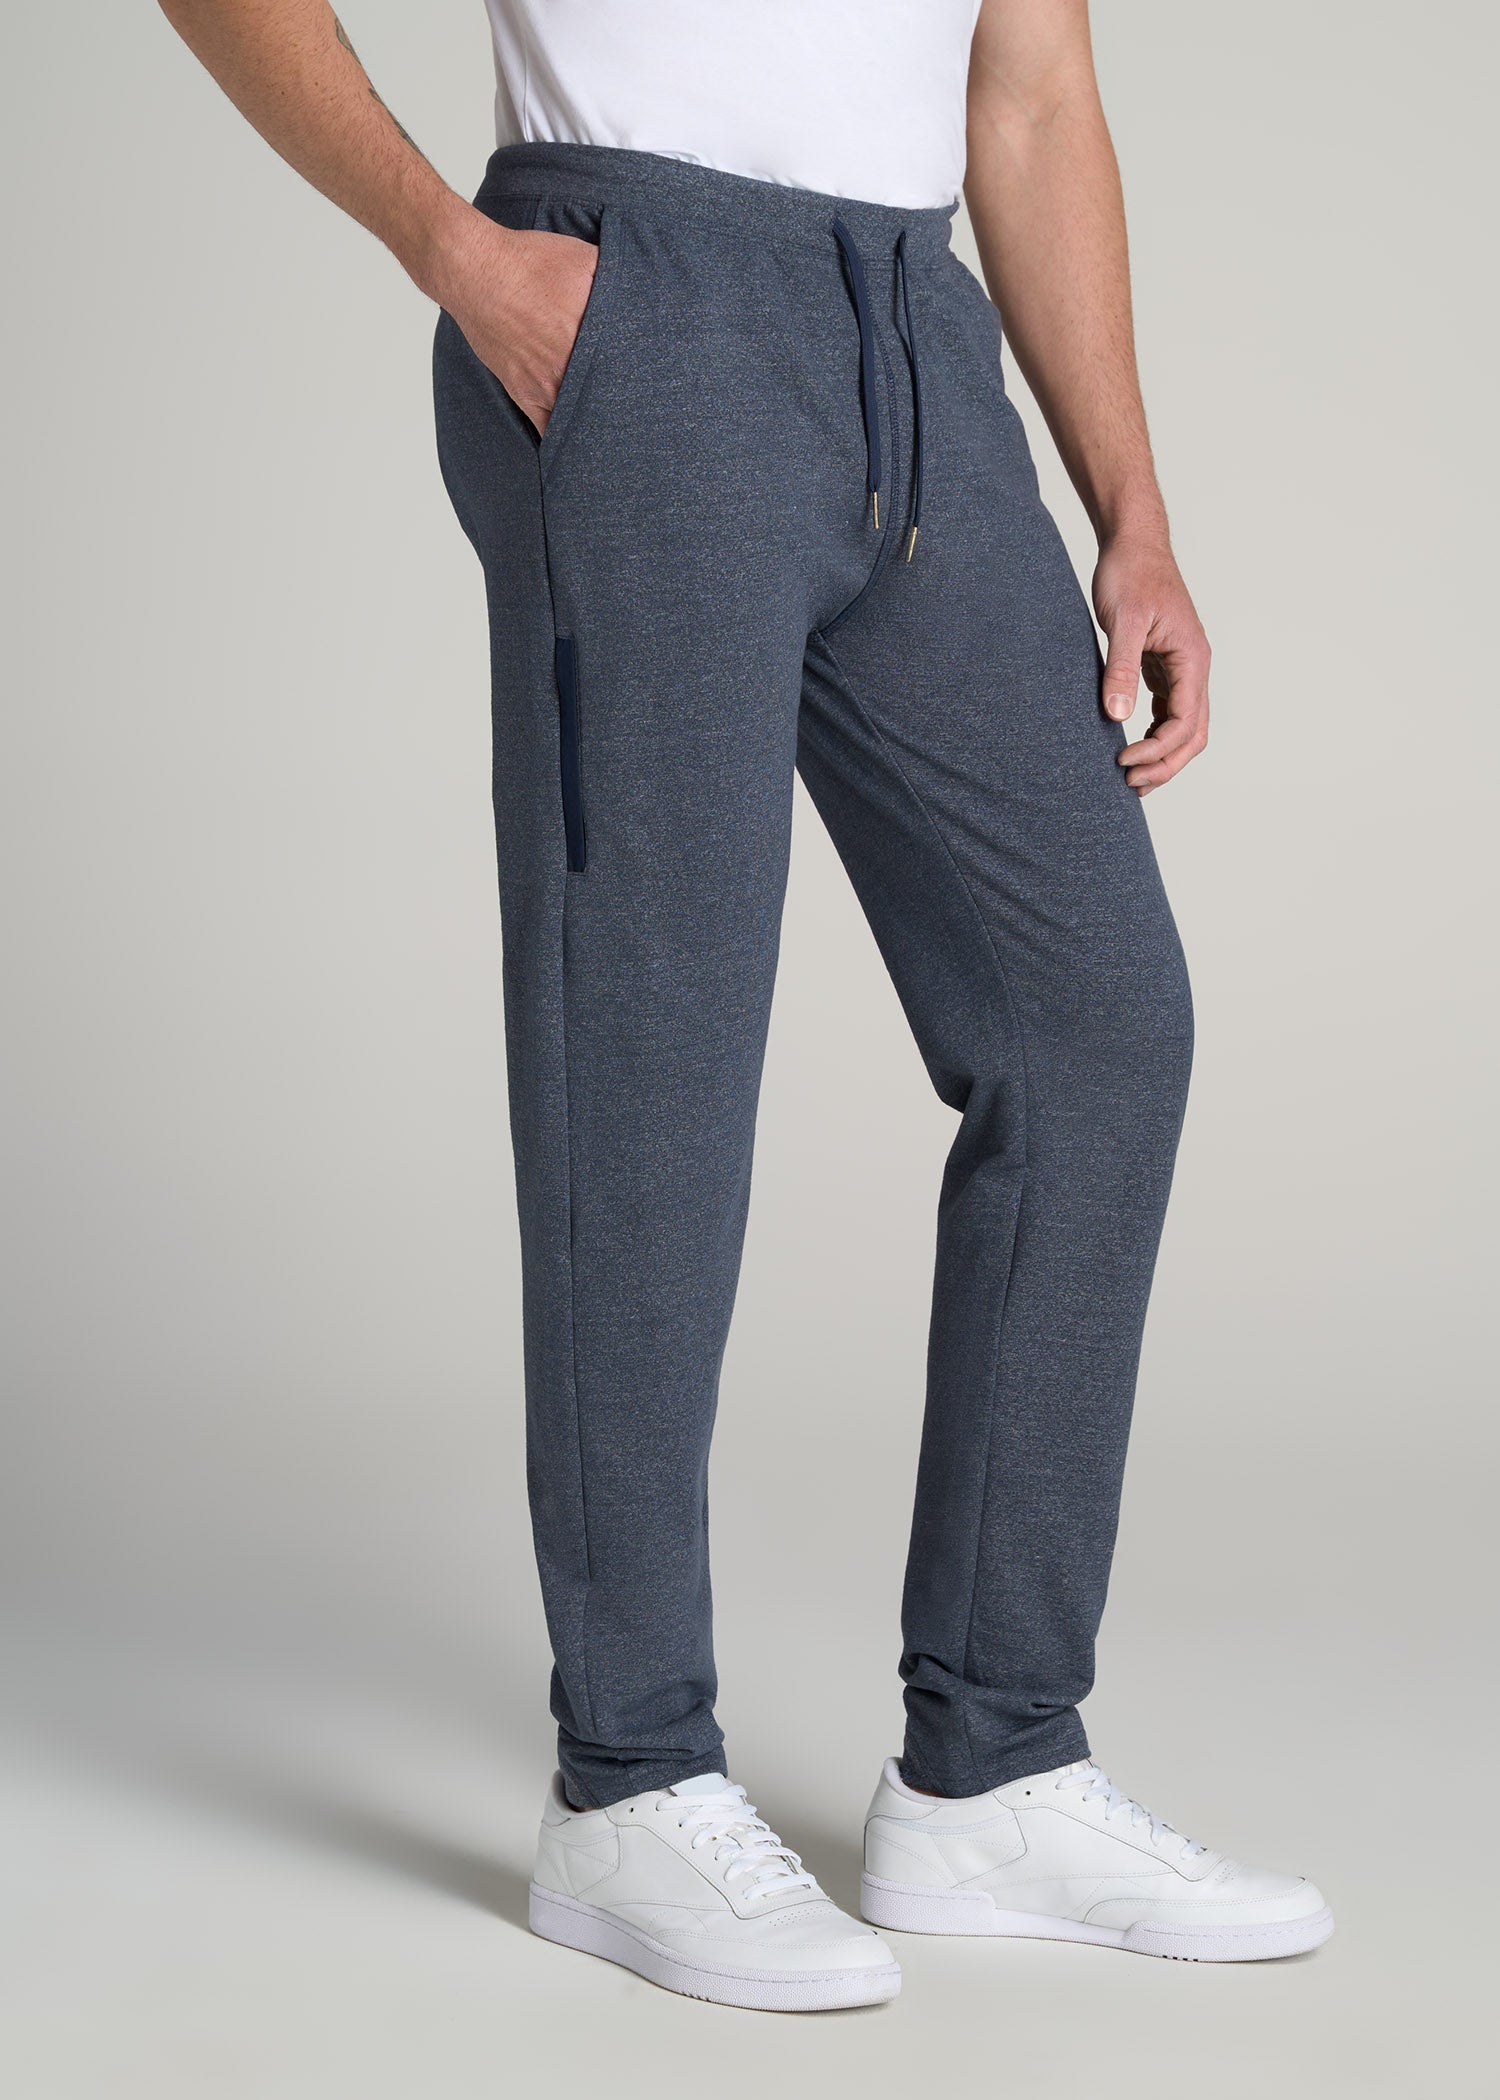 Microsanded French Terry Sweatpants for Tall Men in Navy Mix